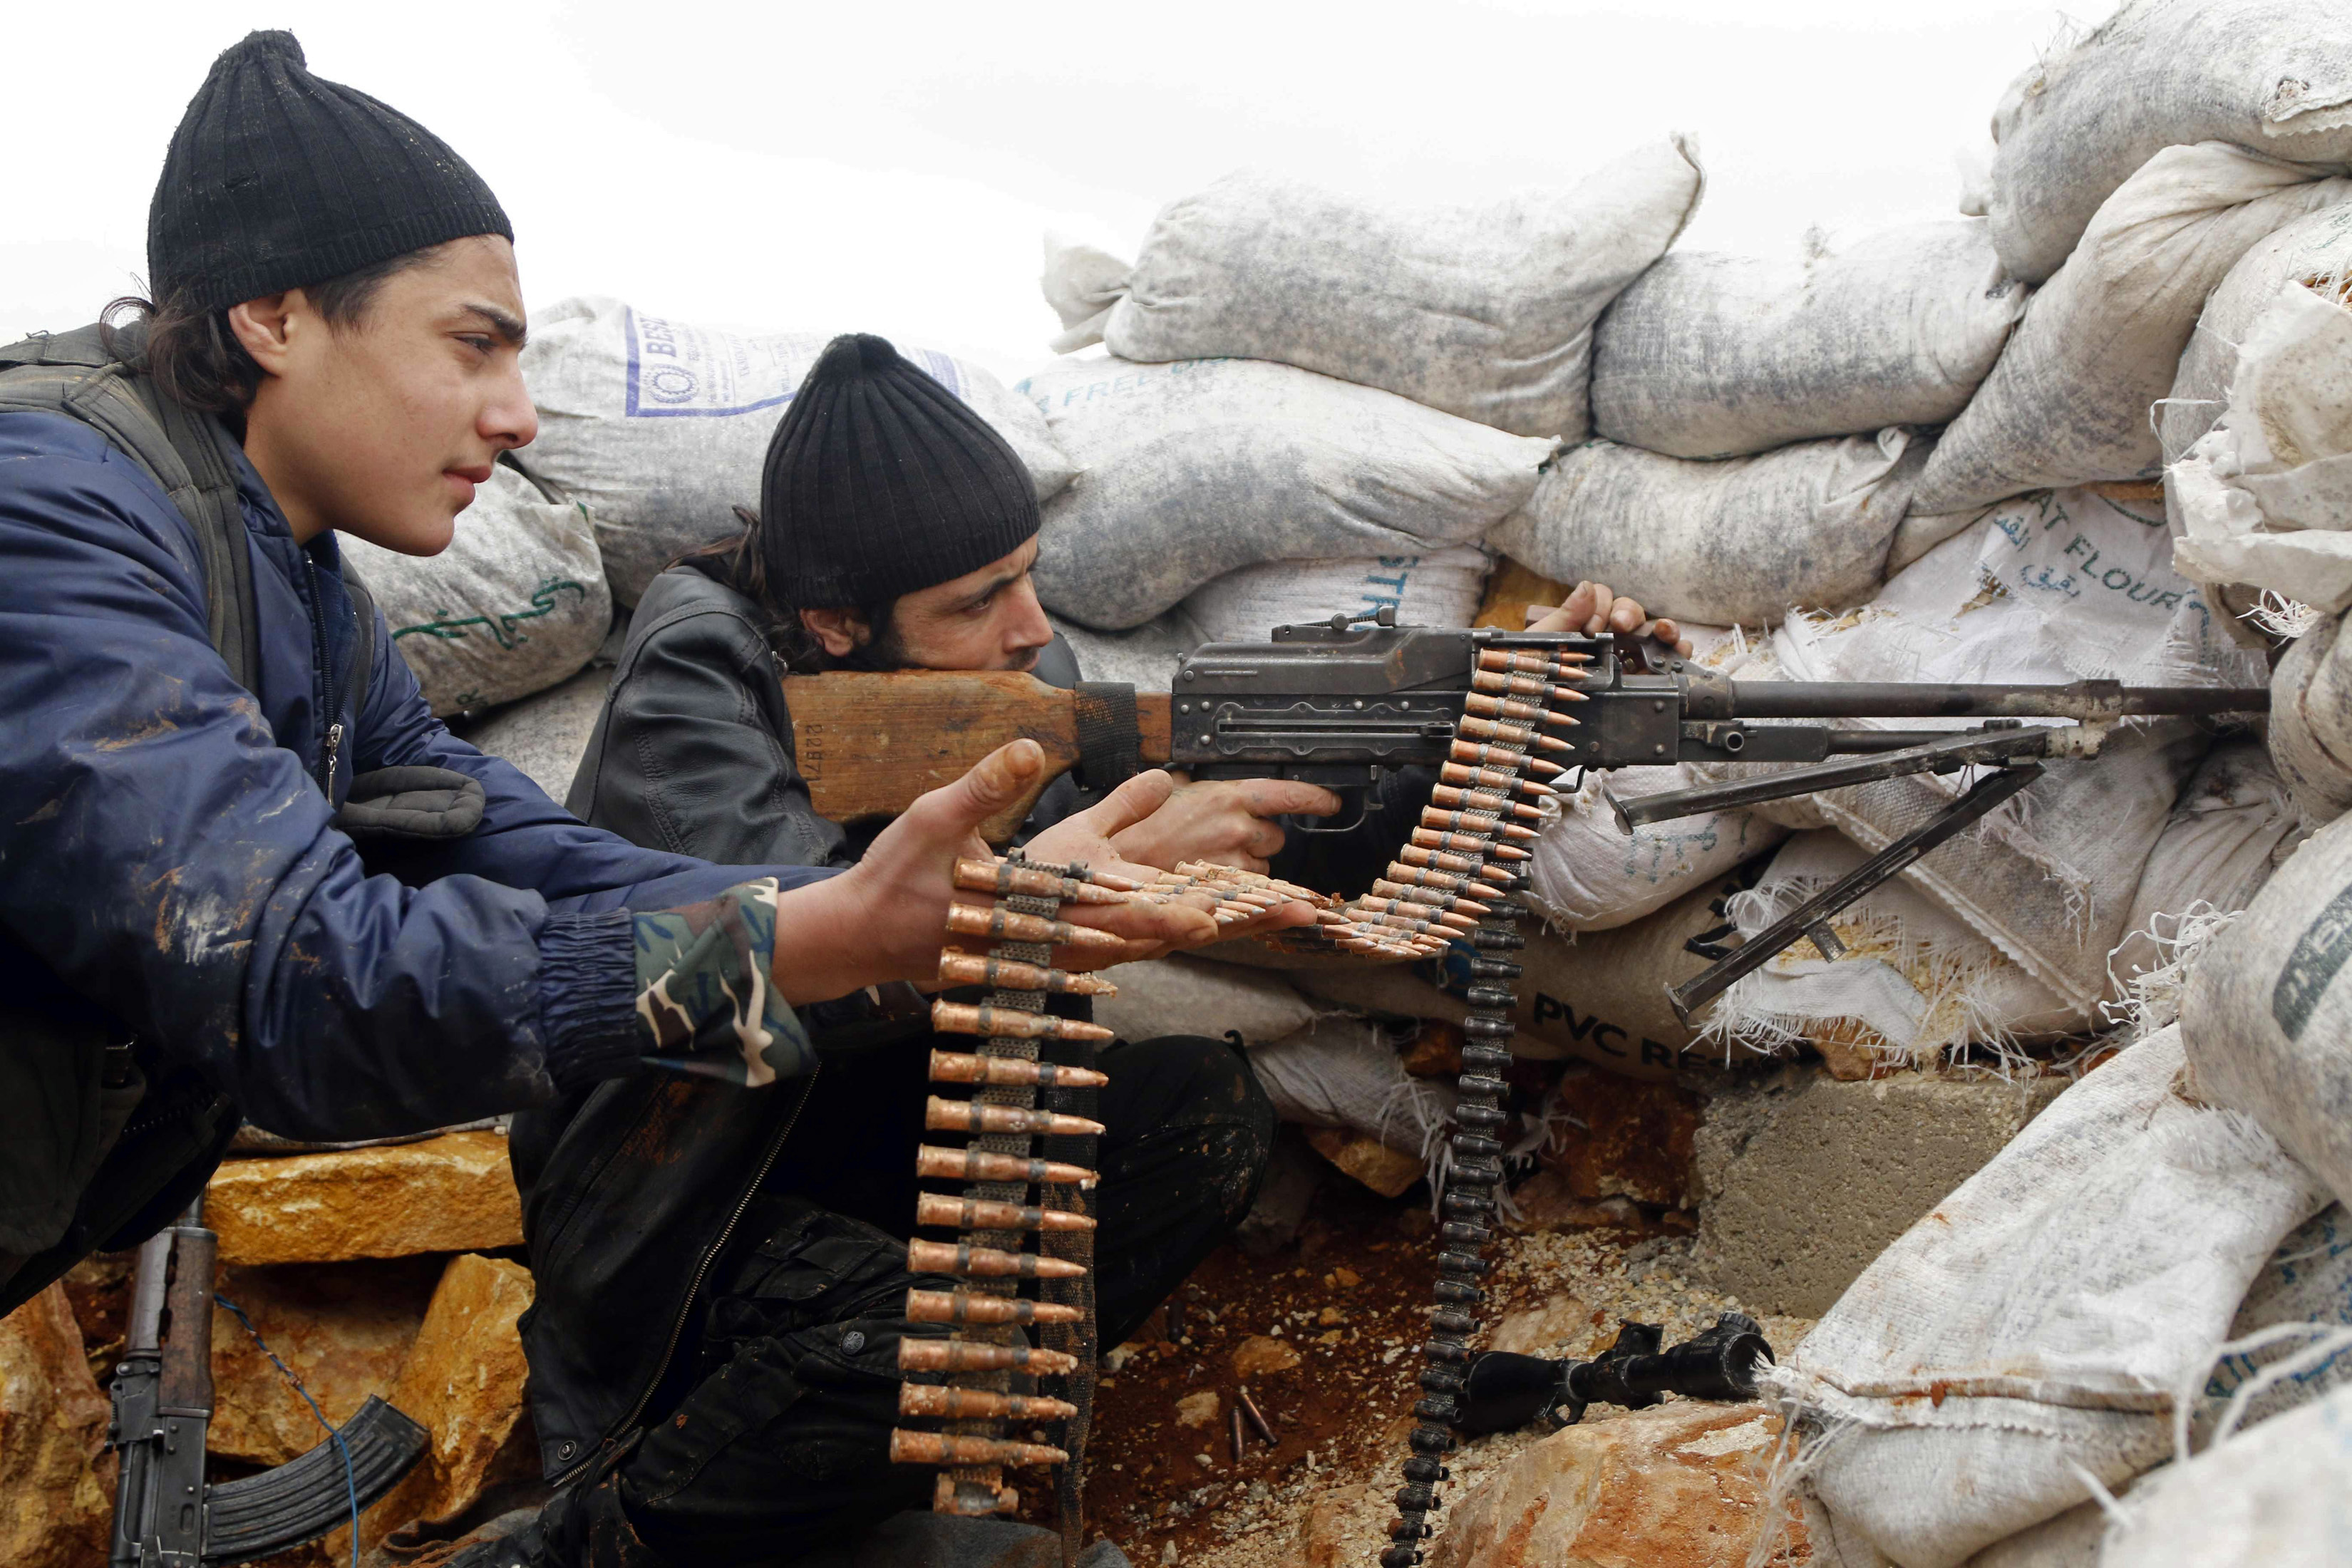 Rebel fighters fire a weapon on the al-Breij frontline, after what they said was an advance by them in the Manasher al-Hajr area where the forces of Syrian President Bashar Assad were stationed in Aleppo, Syria, on Jan. 7, 2015 (Hosam Katan—Reuters)